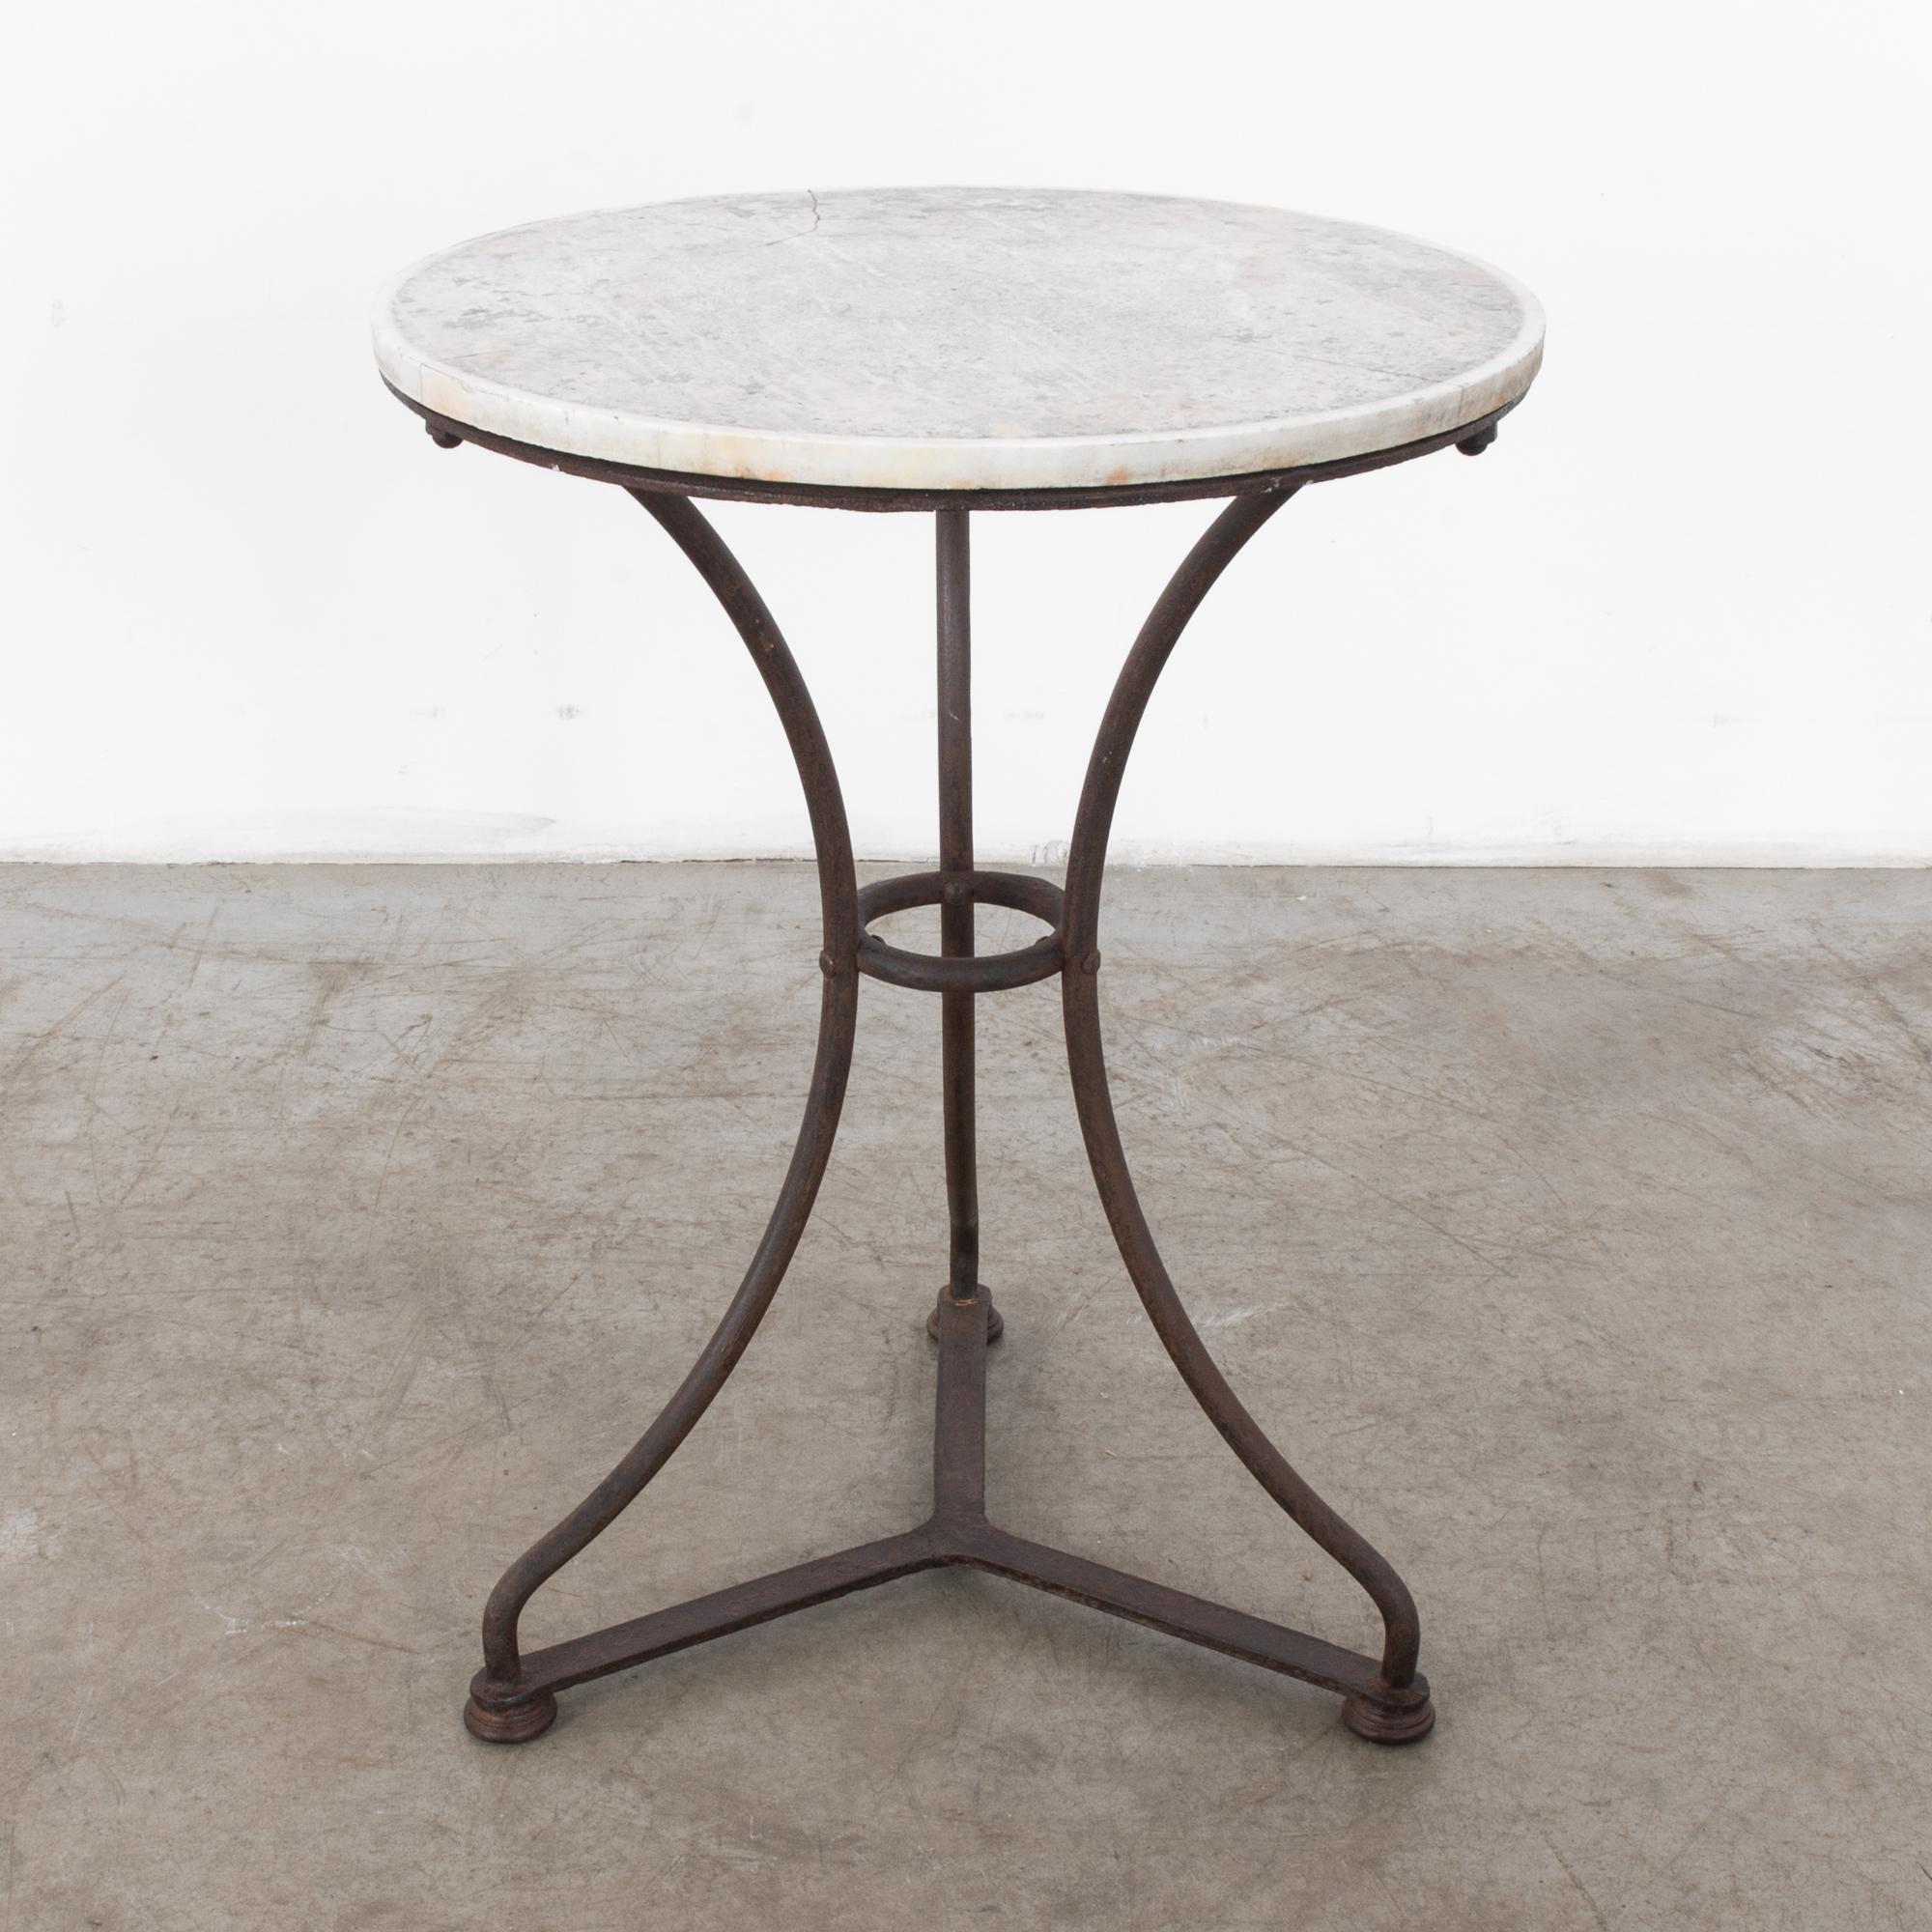 Early 20th Century Antique French Iron and Marble Side Table